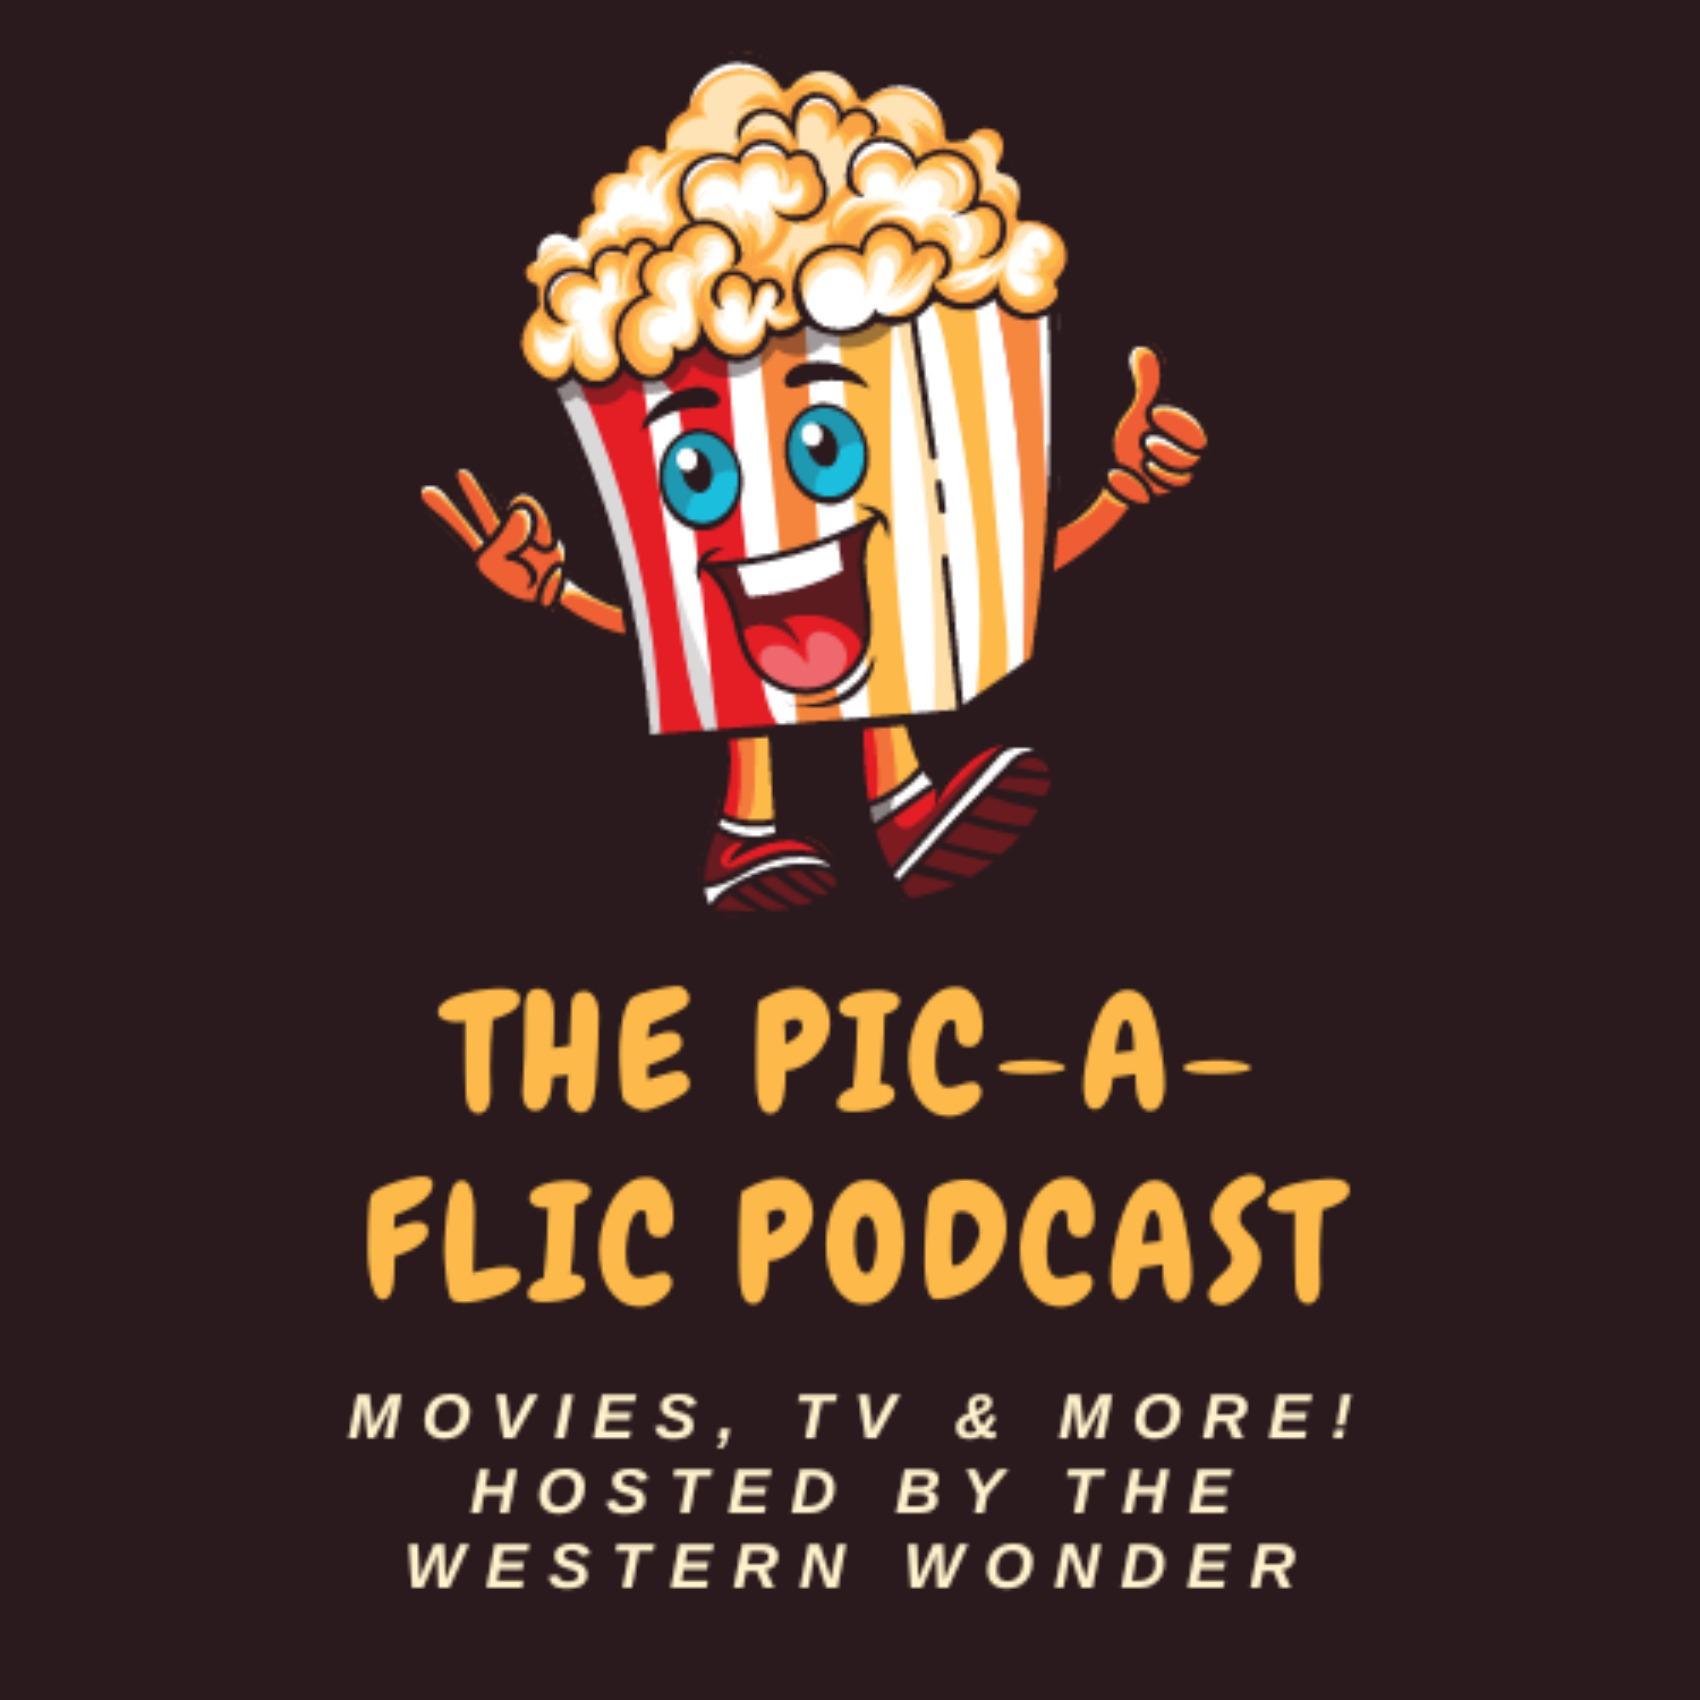 The Pic-a-Flic Podcast